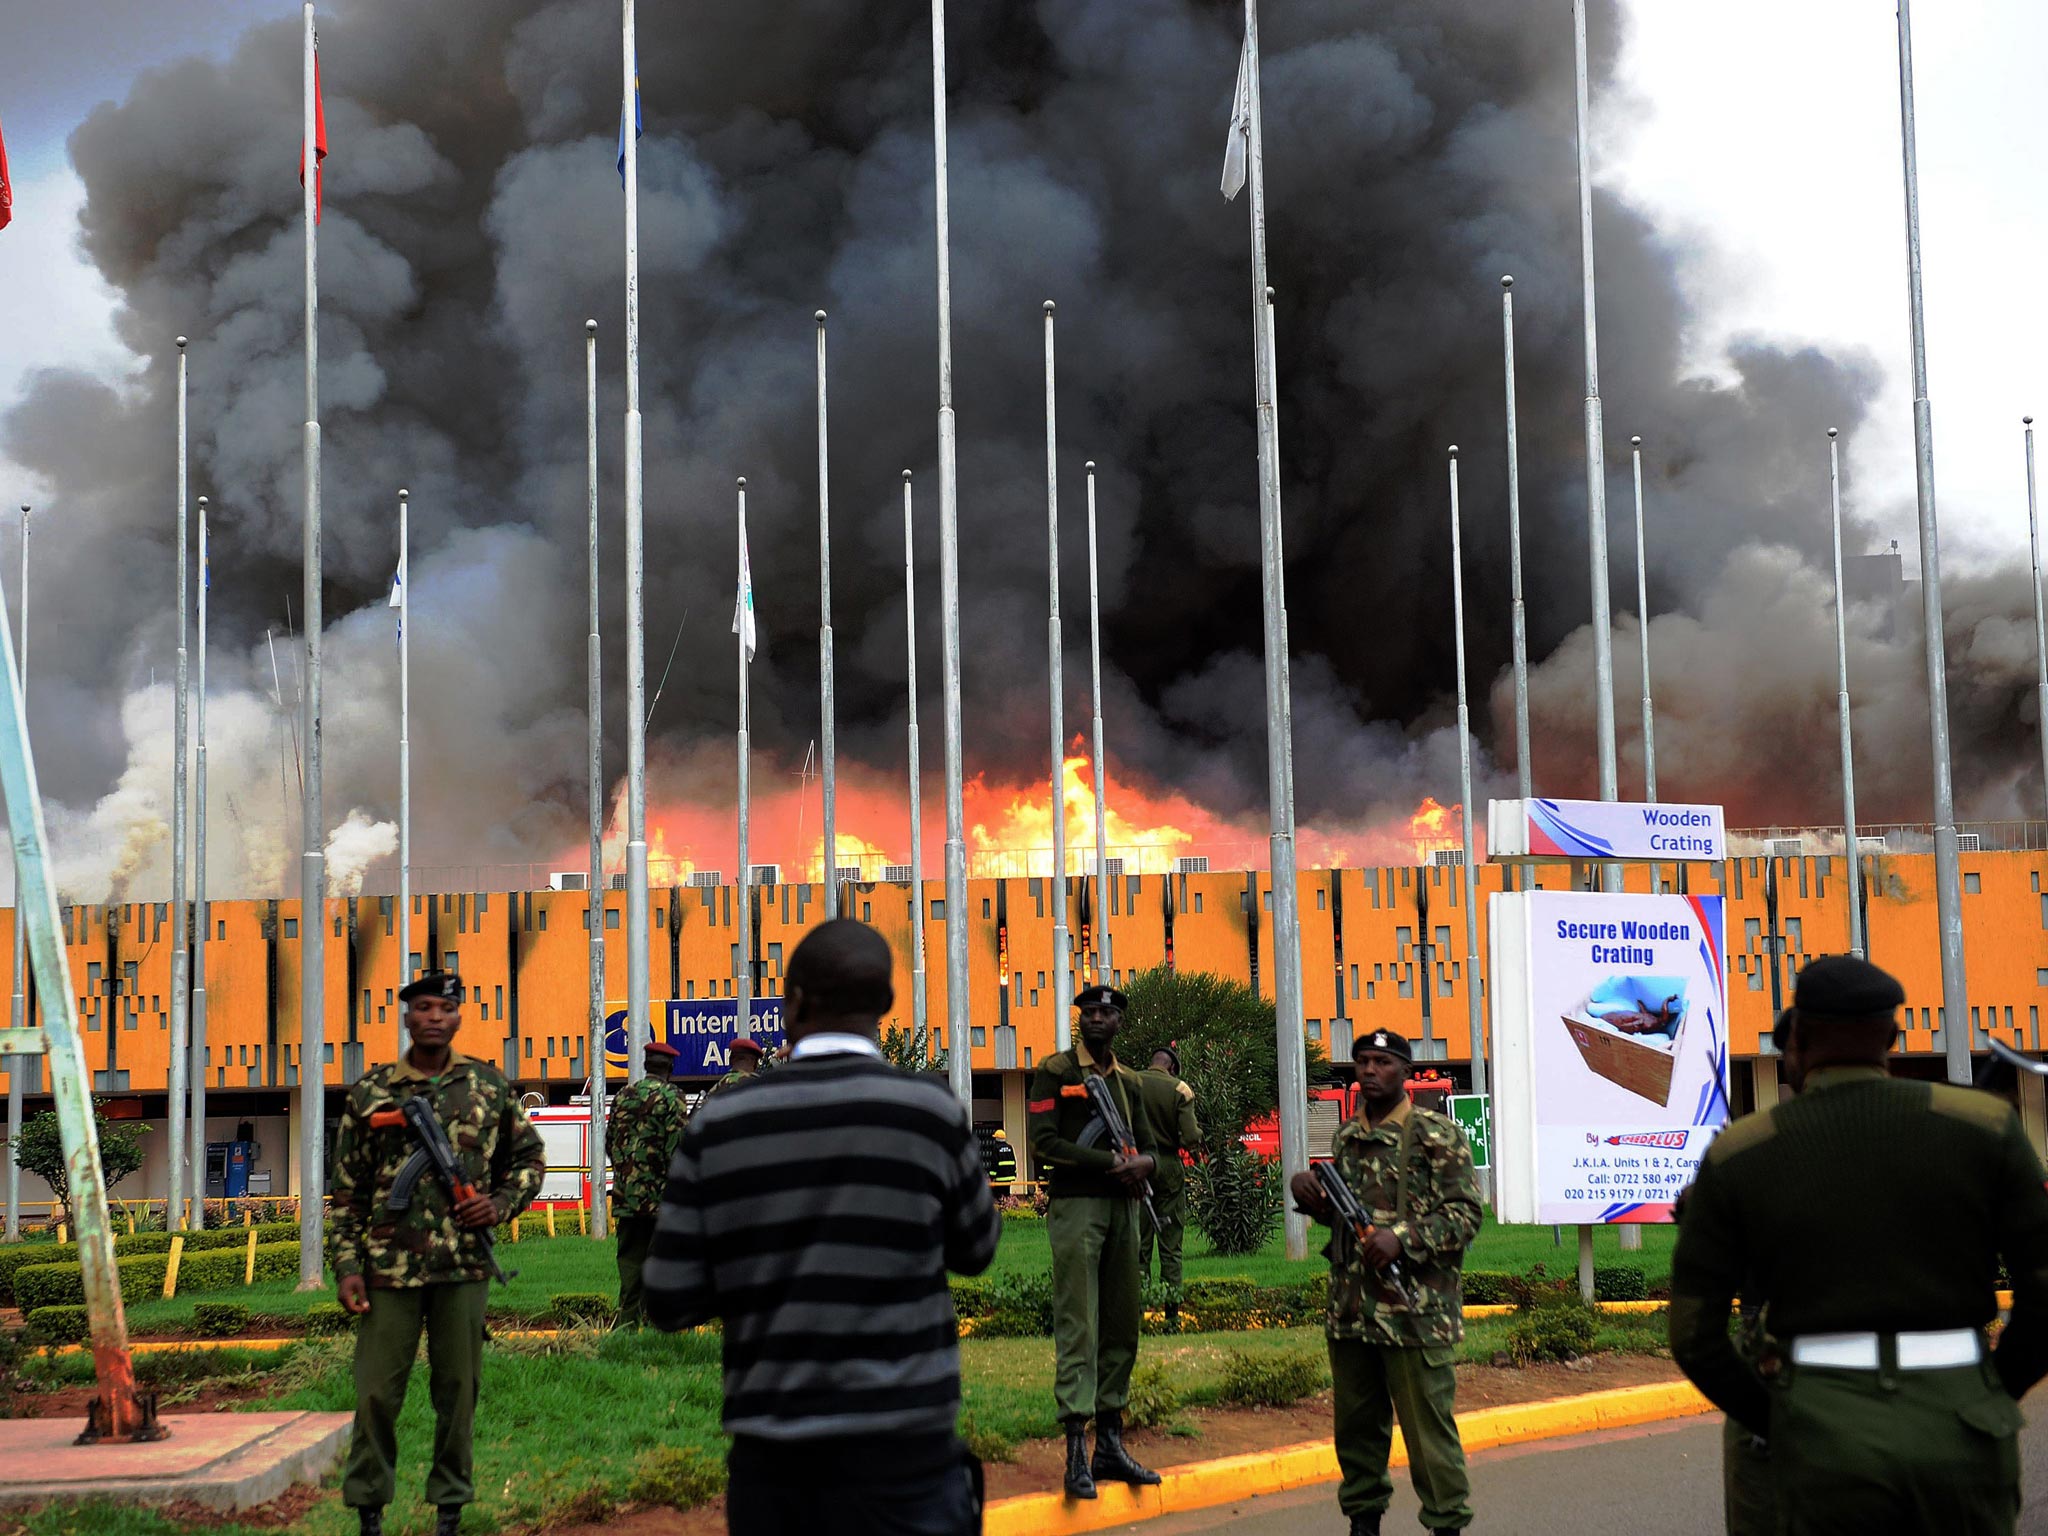 General Service (GSU) officer stand outside the burning Jomo Kenyatta international airport. A massive fire shut down Nairobi's international airport today with flights diverted to regional cities as firefighters battled to put out the blaze in east Afric